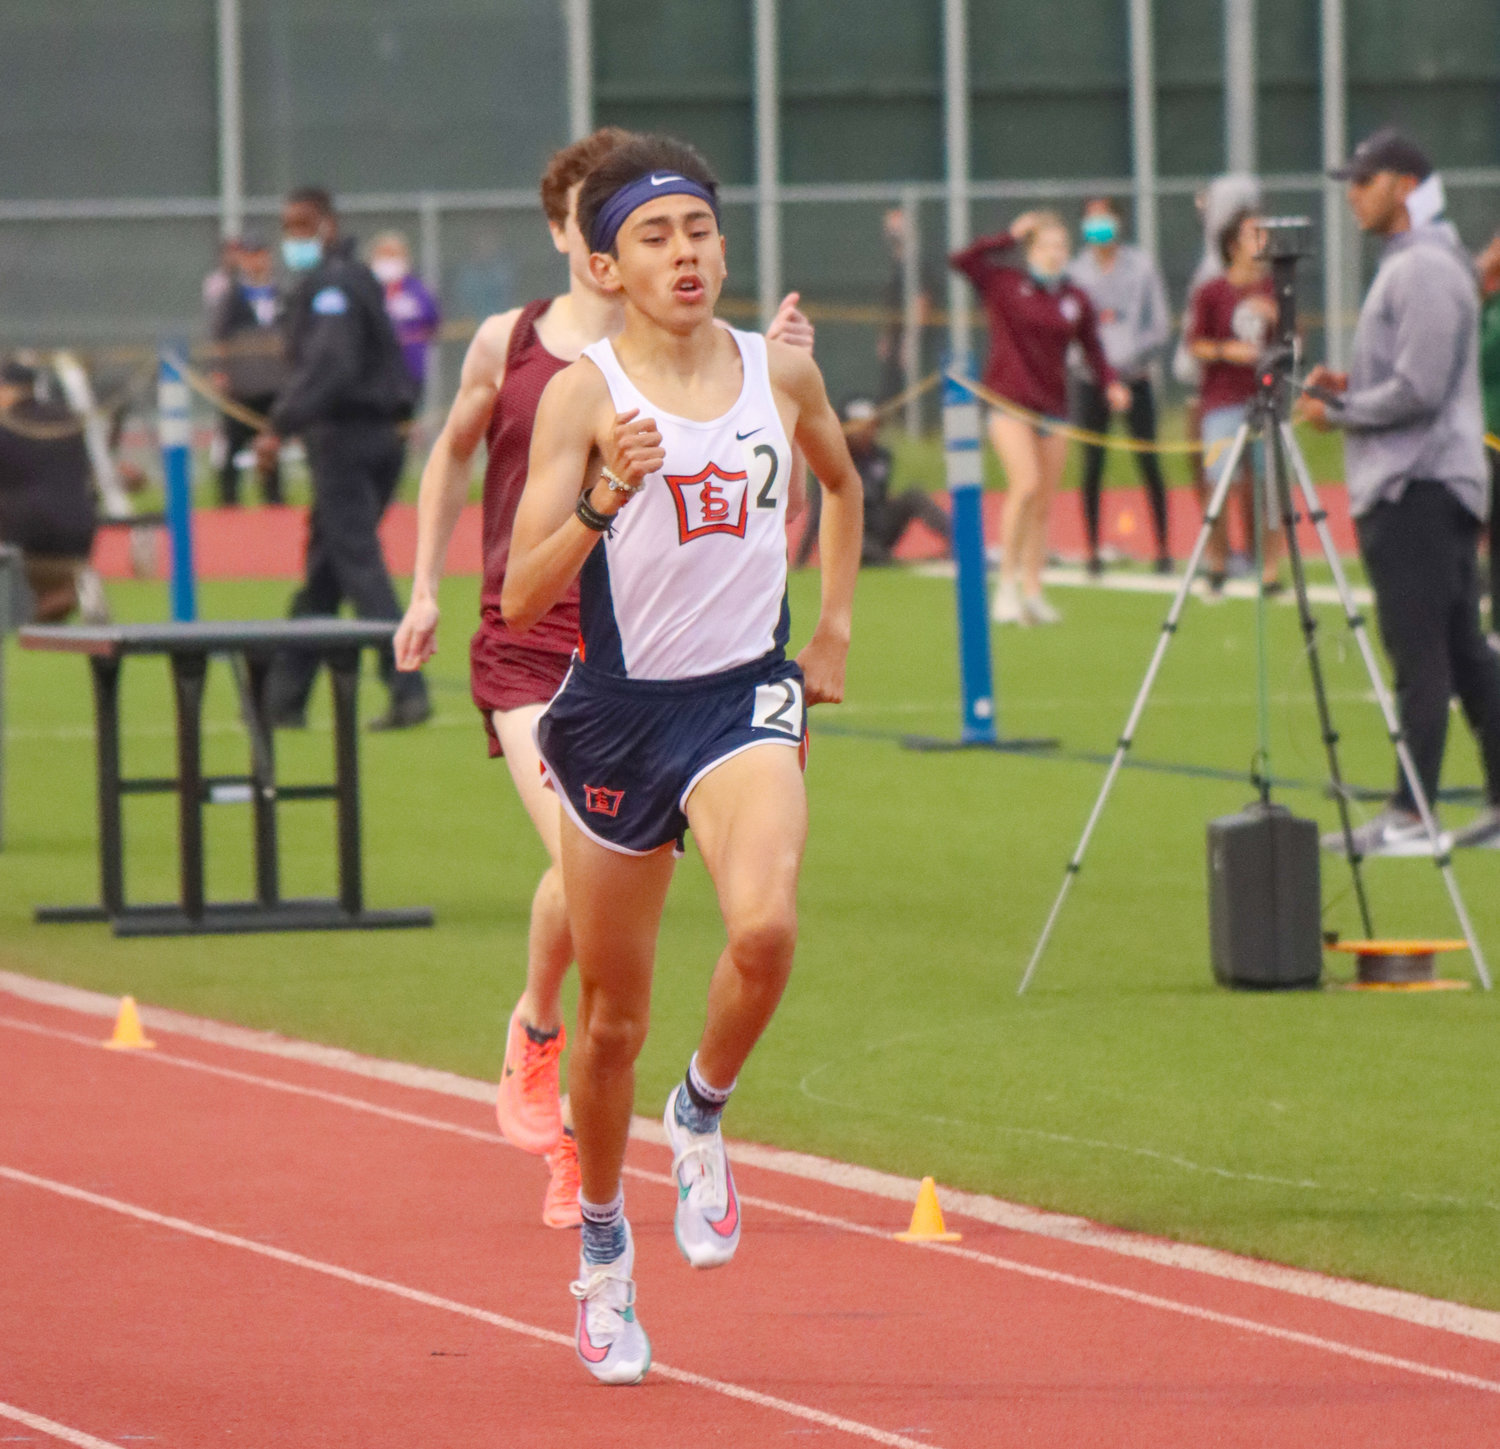 Seven Lakes junior Ruben Rojas Betanzos won gold in the 800, 1600 and 3200 runs at the 19-20-6A area meet on Thursday, April 15, at Paetow High. He was the only Katy ISD athlete to win gold in three events at the meet.